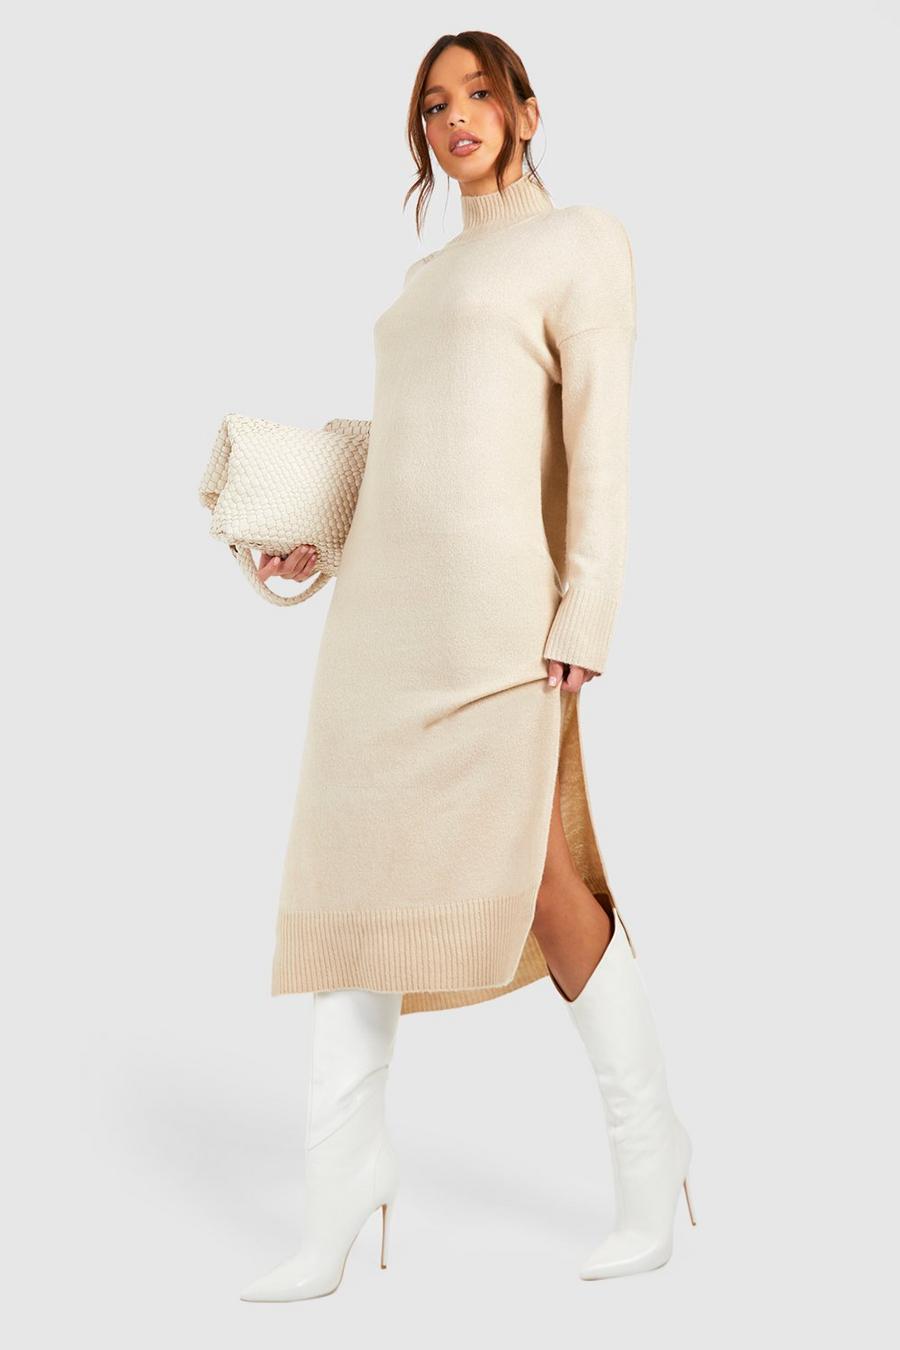 Biscuit Tall Turtle Neck Longline Dress image number 1